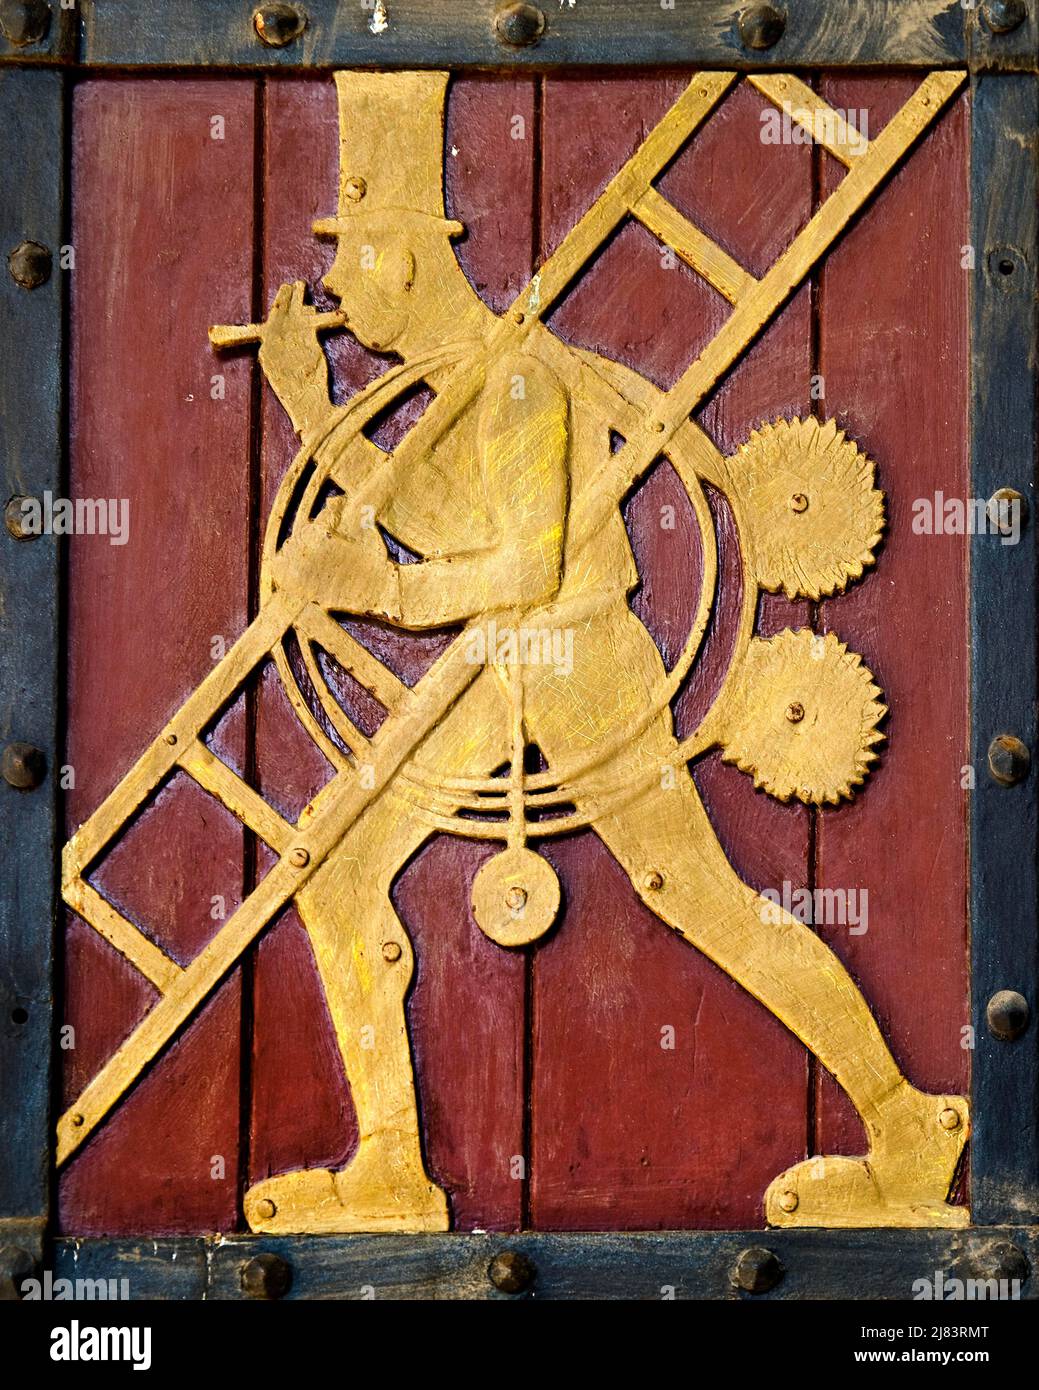 Historic figure on the door to the Ratskeller representing the craft of the chimney sweep, Luebeck, Schleswig-Holstein, Germany Stock Photo